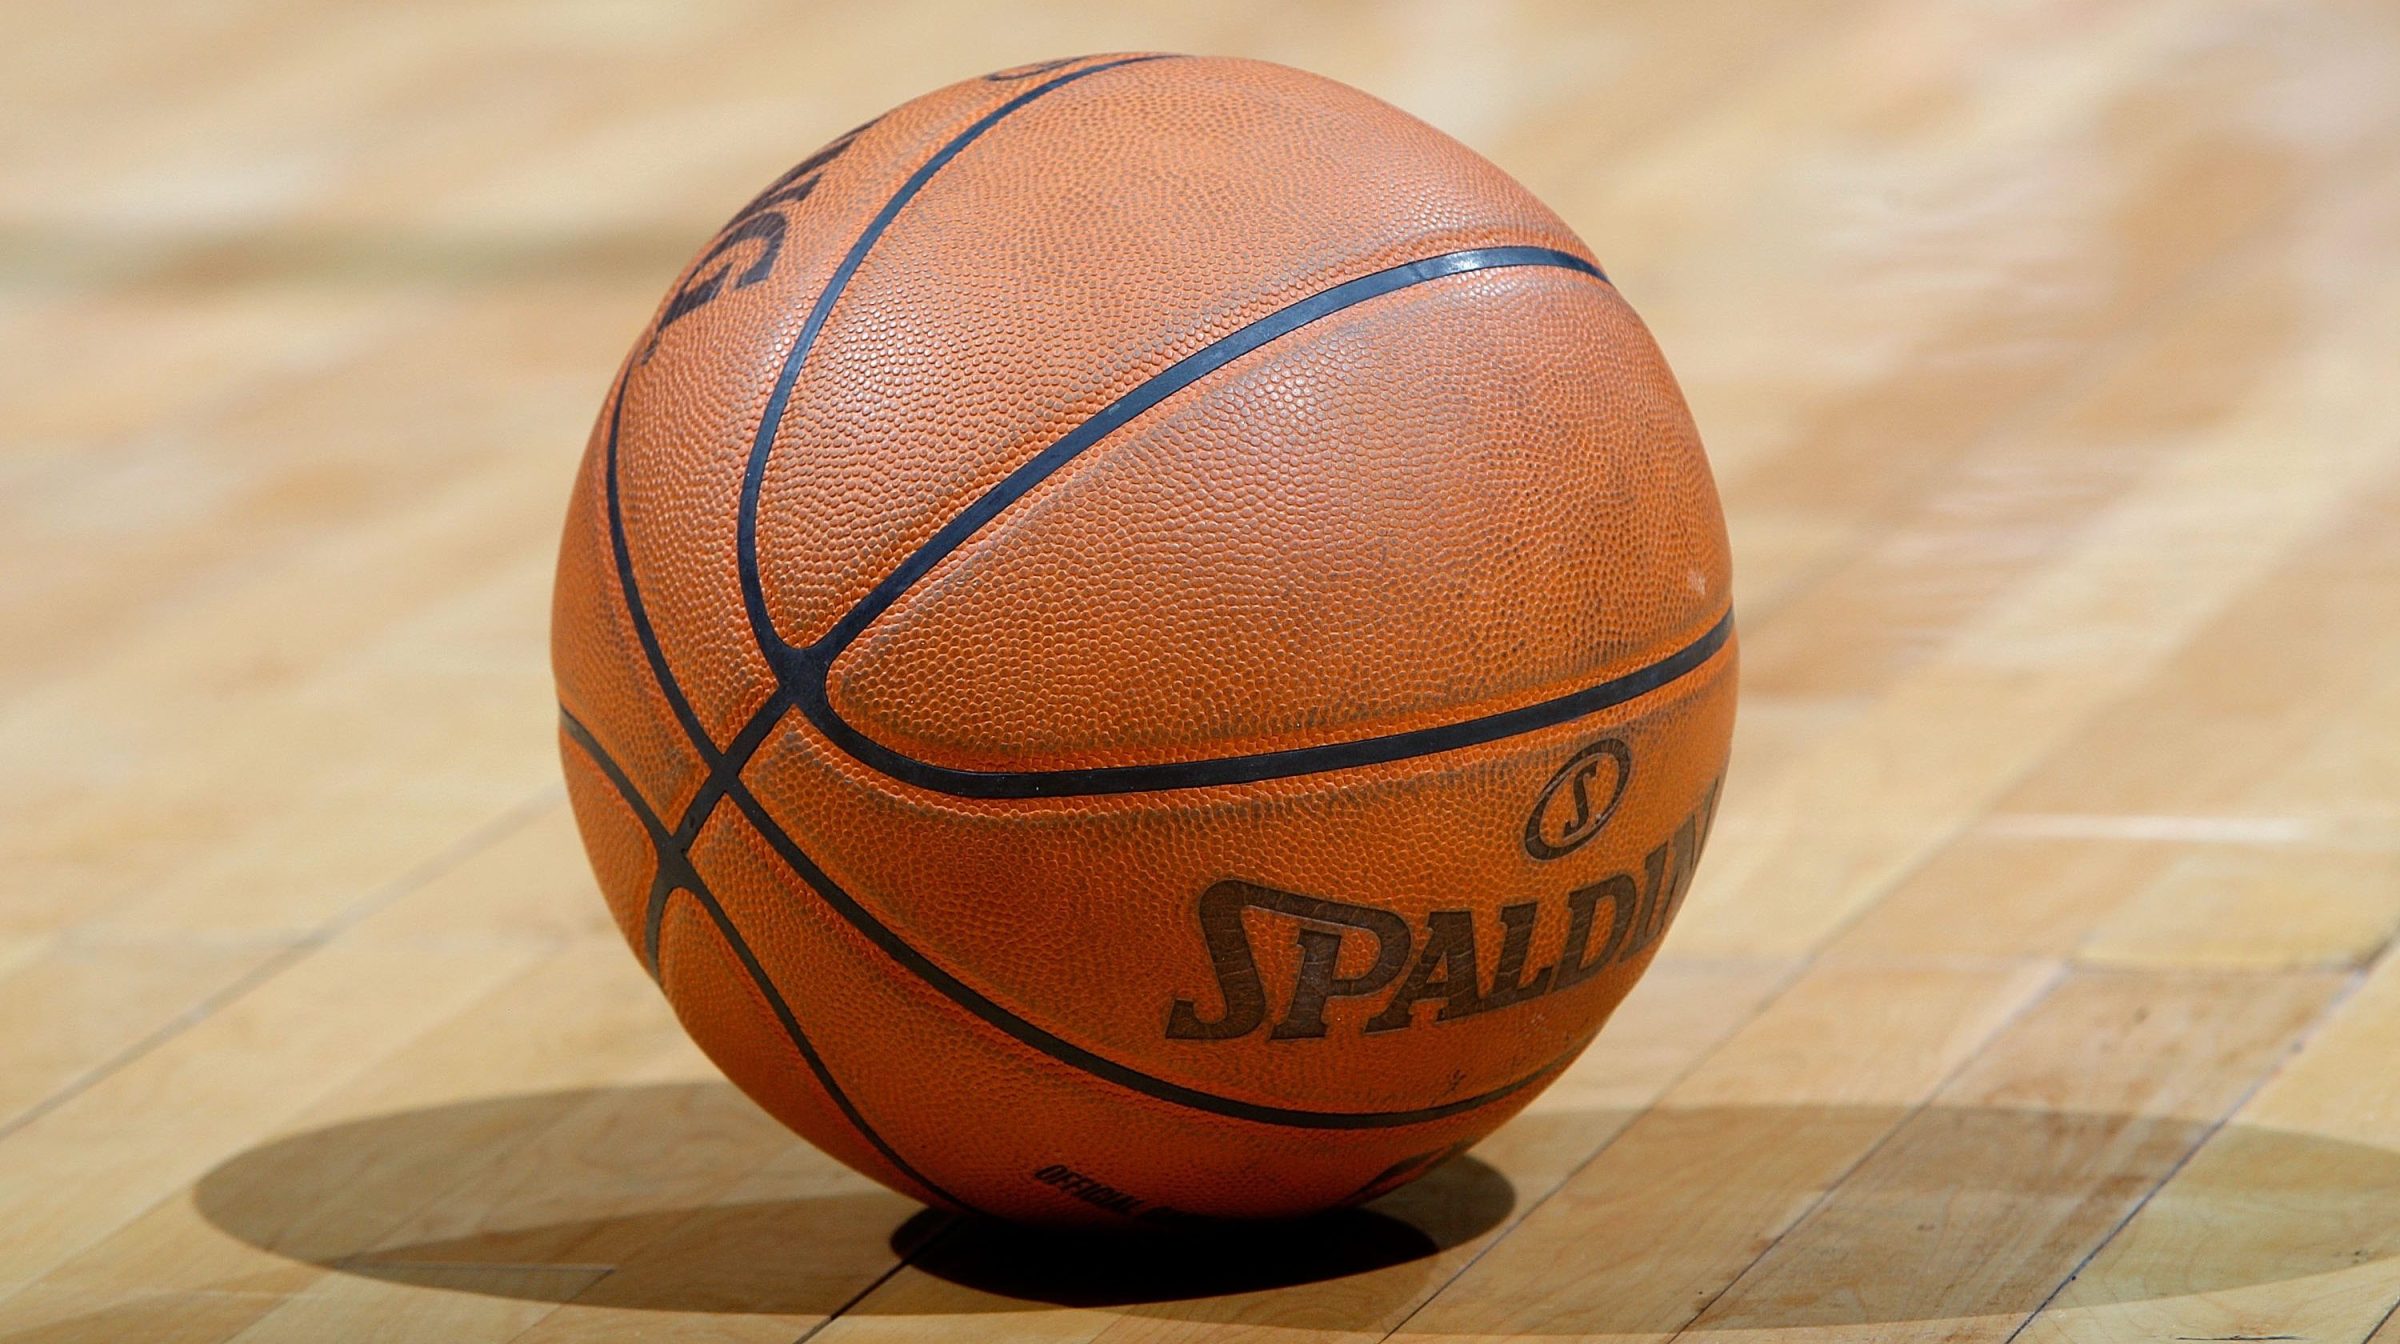 A Spalding ball sits on the court during the game between the Atlanta Hawks and the Houston Rockets at Philips Arena on November 20, 2009 in Atlanta, Georgia.